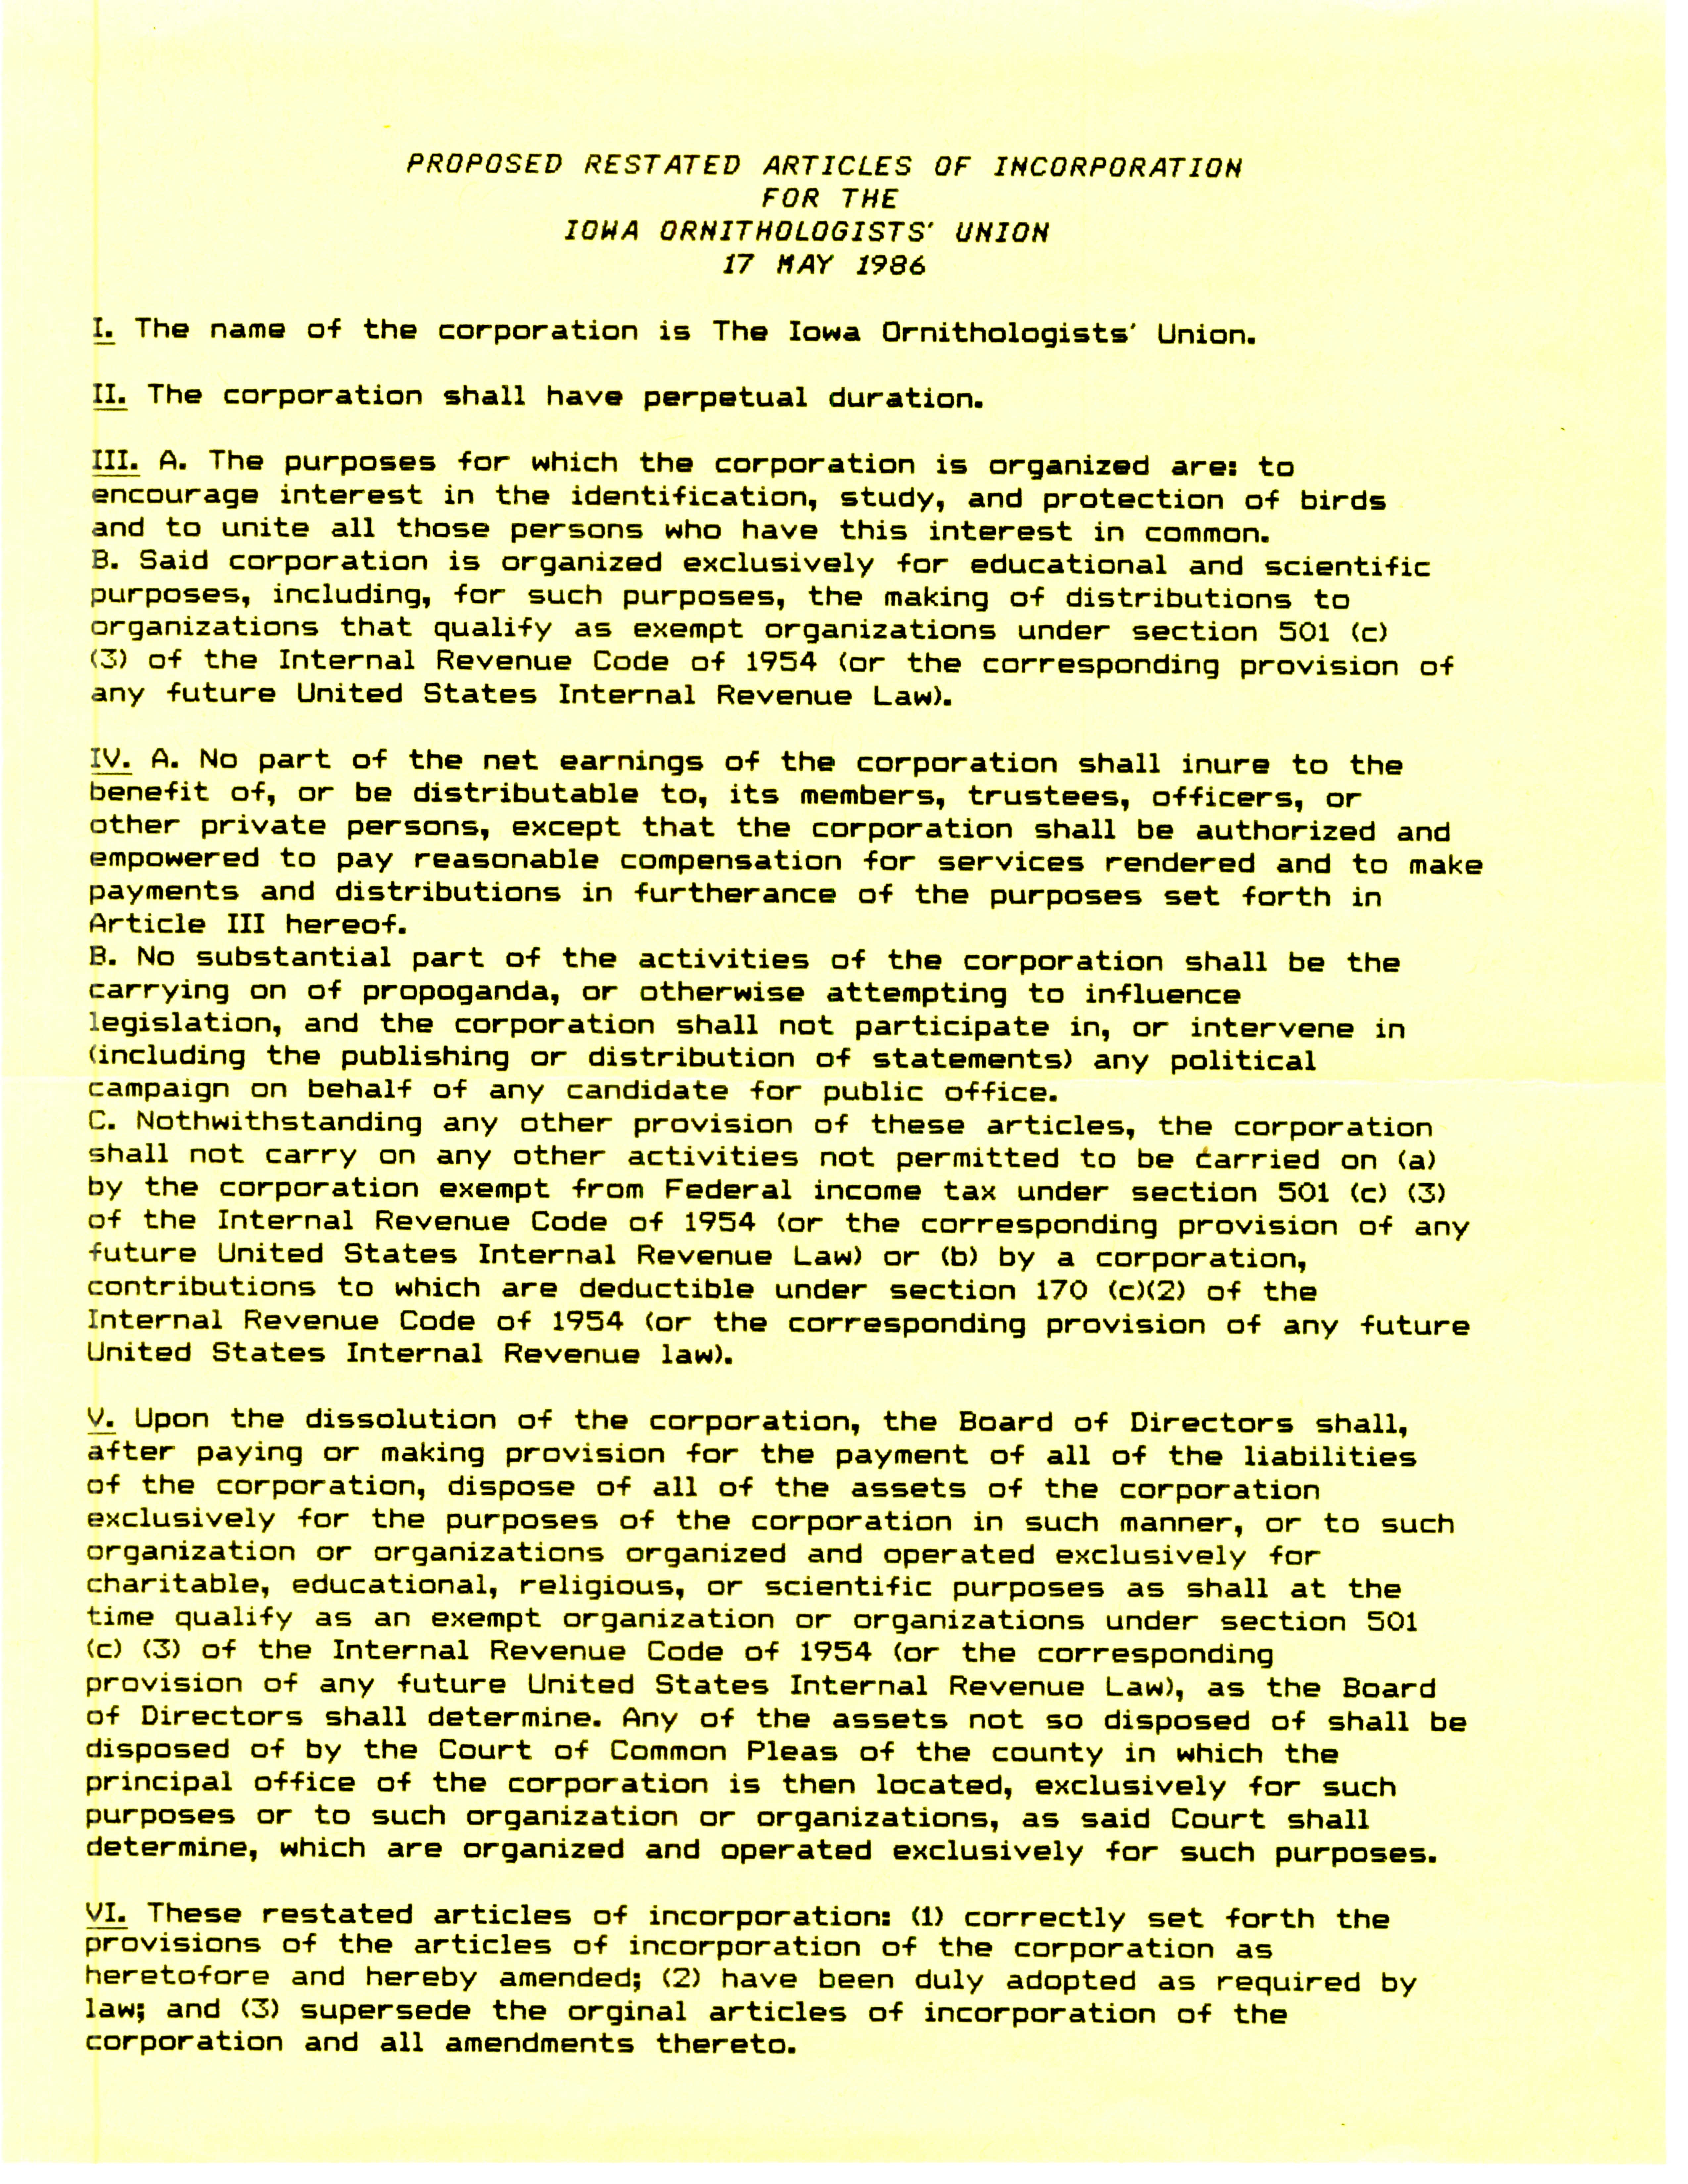 Proposed Restated Articles of Incorporation for the Iowa Ornithologists' Union, May 17, 1986